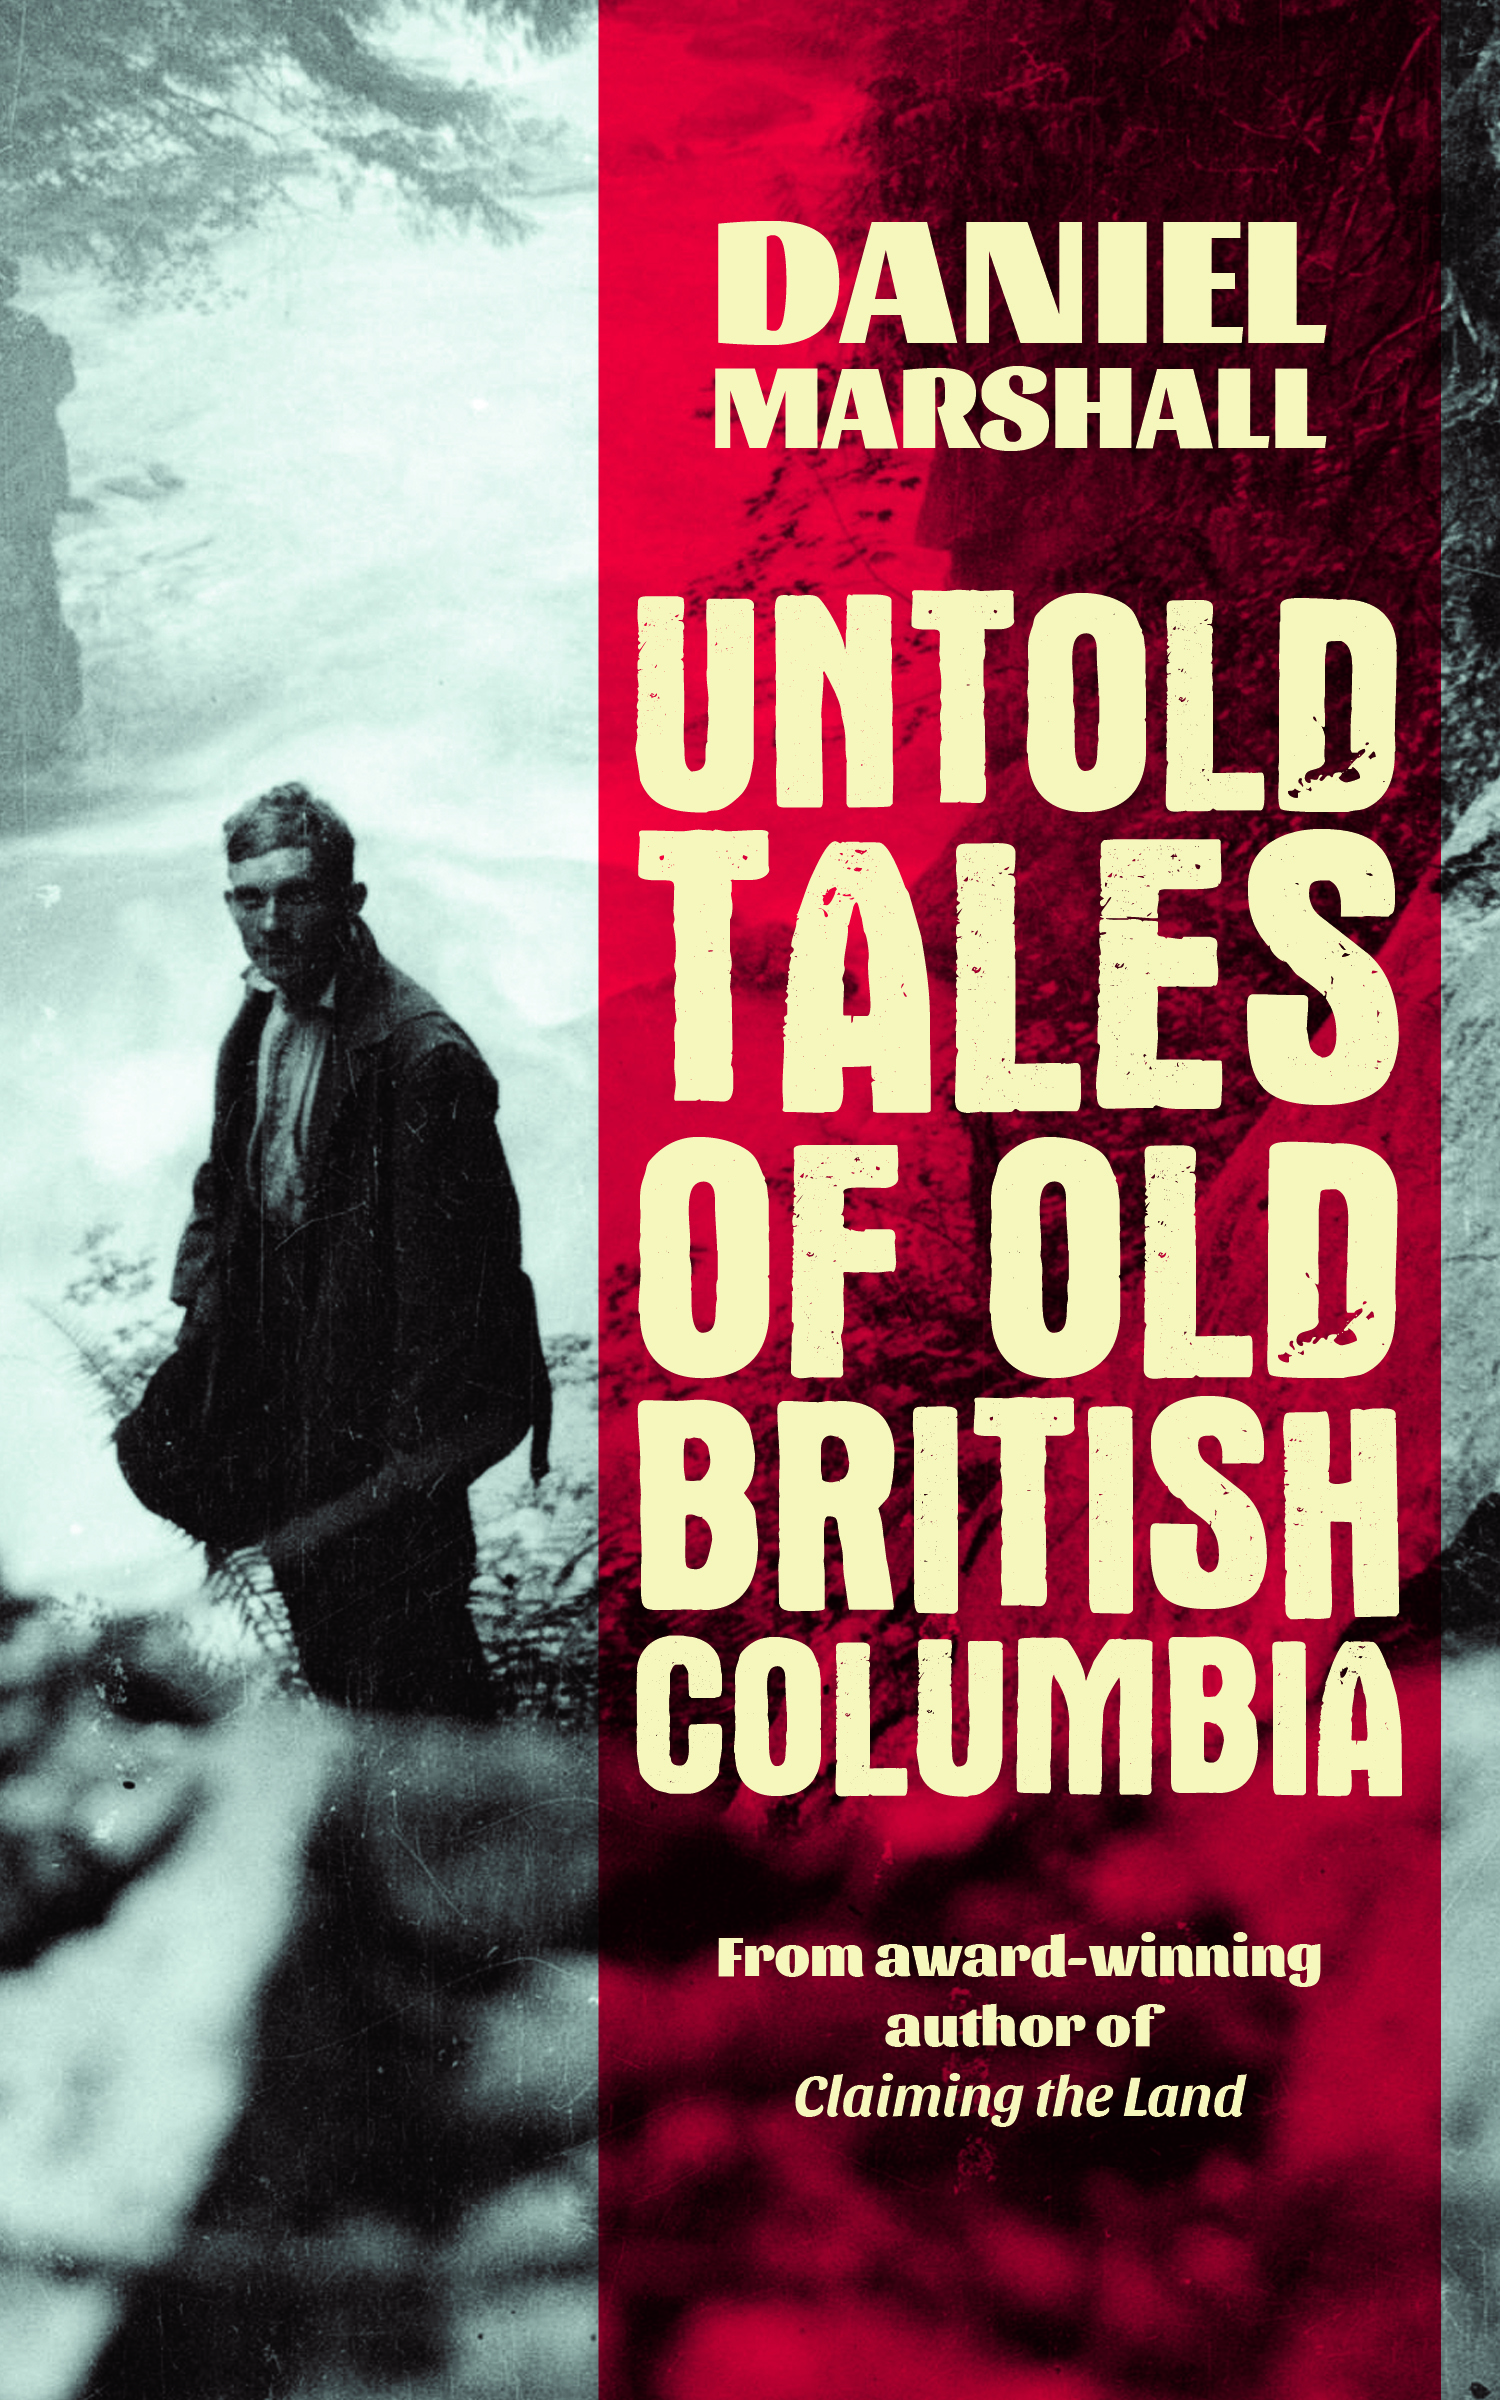 “Untold Tales of
Old British Columbia cover